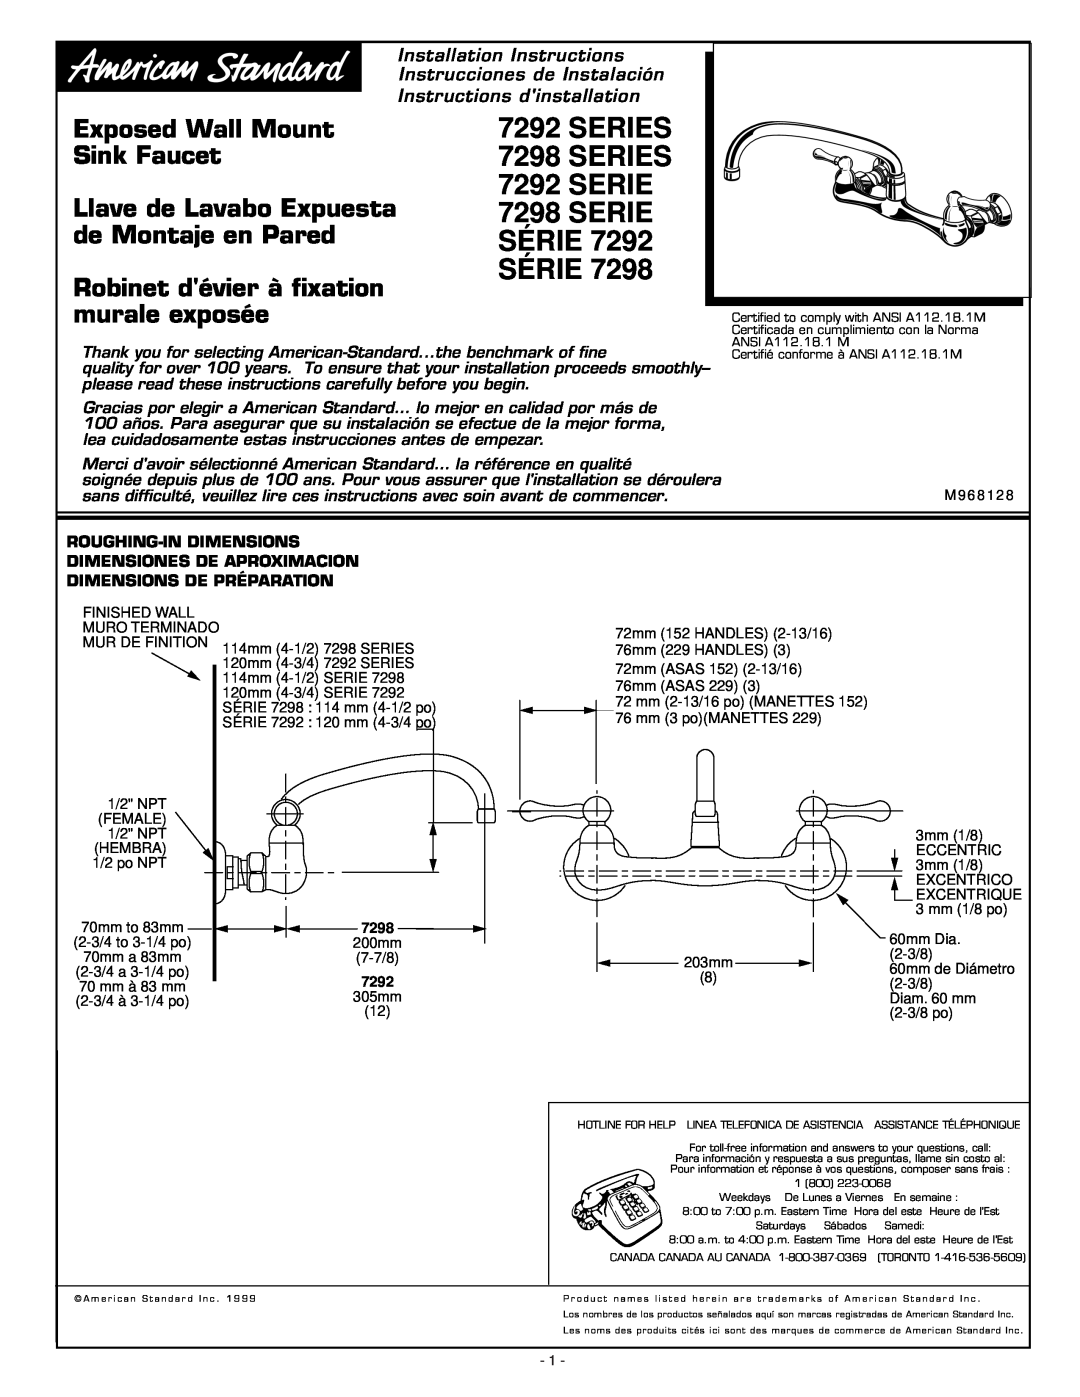 American Standard 7292 Series installation instructions Roughing-Indimensions Dimensiones De Aproximacion, Série 